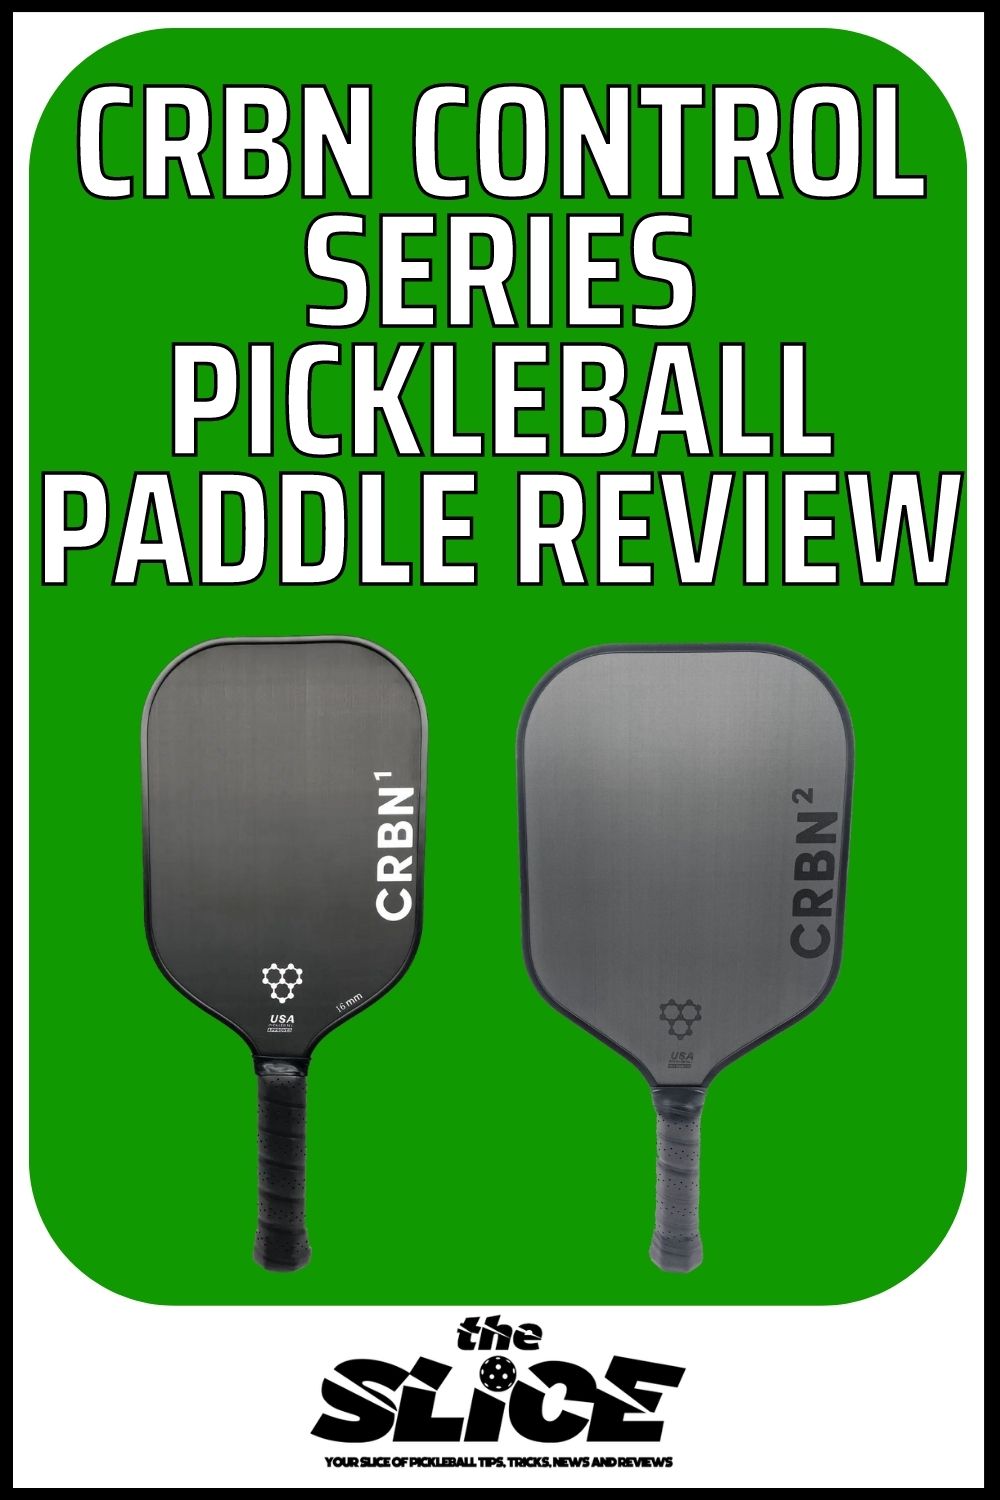 CRBN Control Series Pickleball Paddle Review